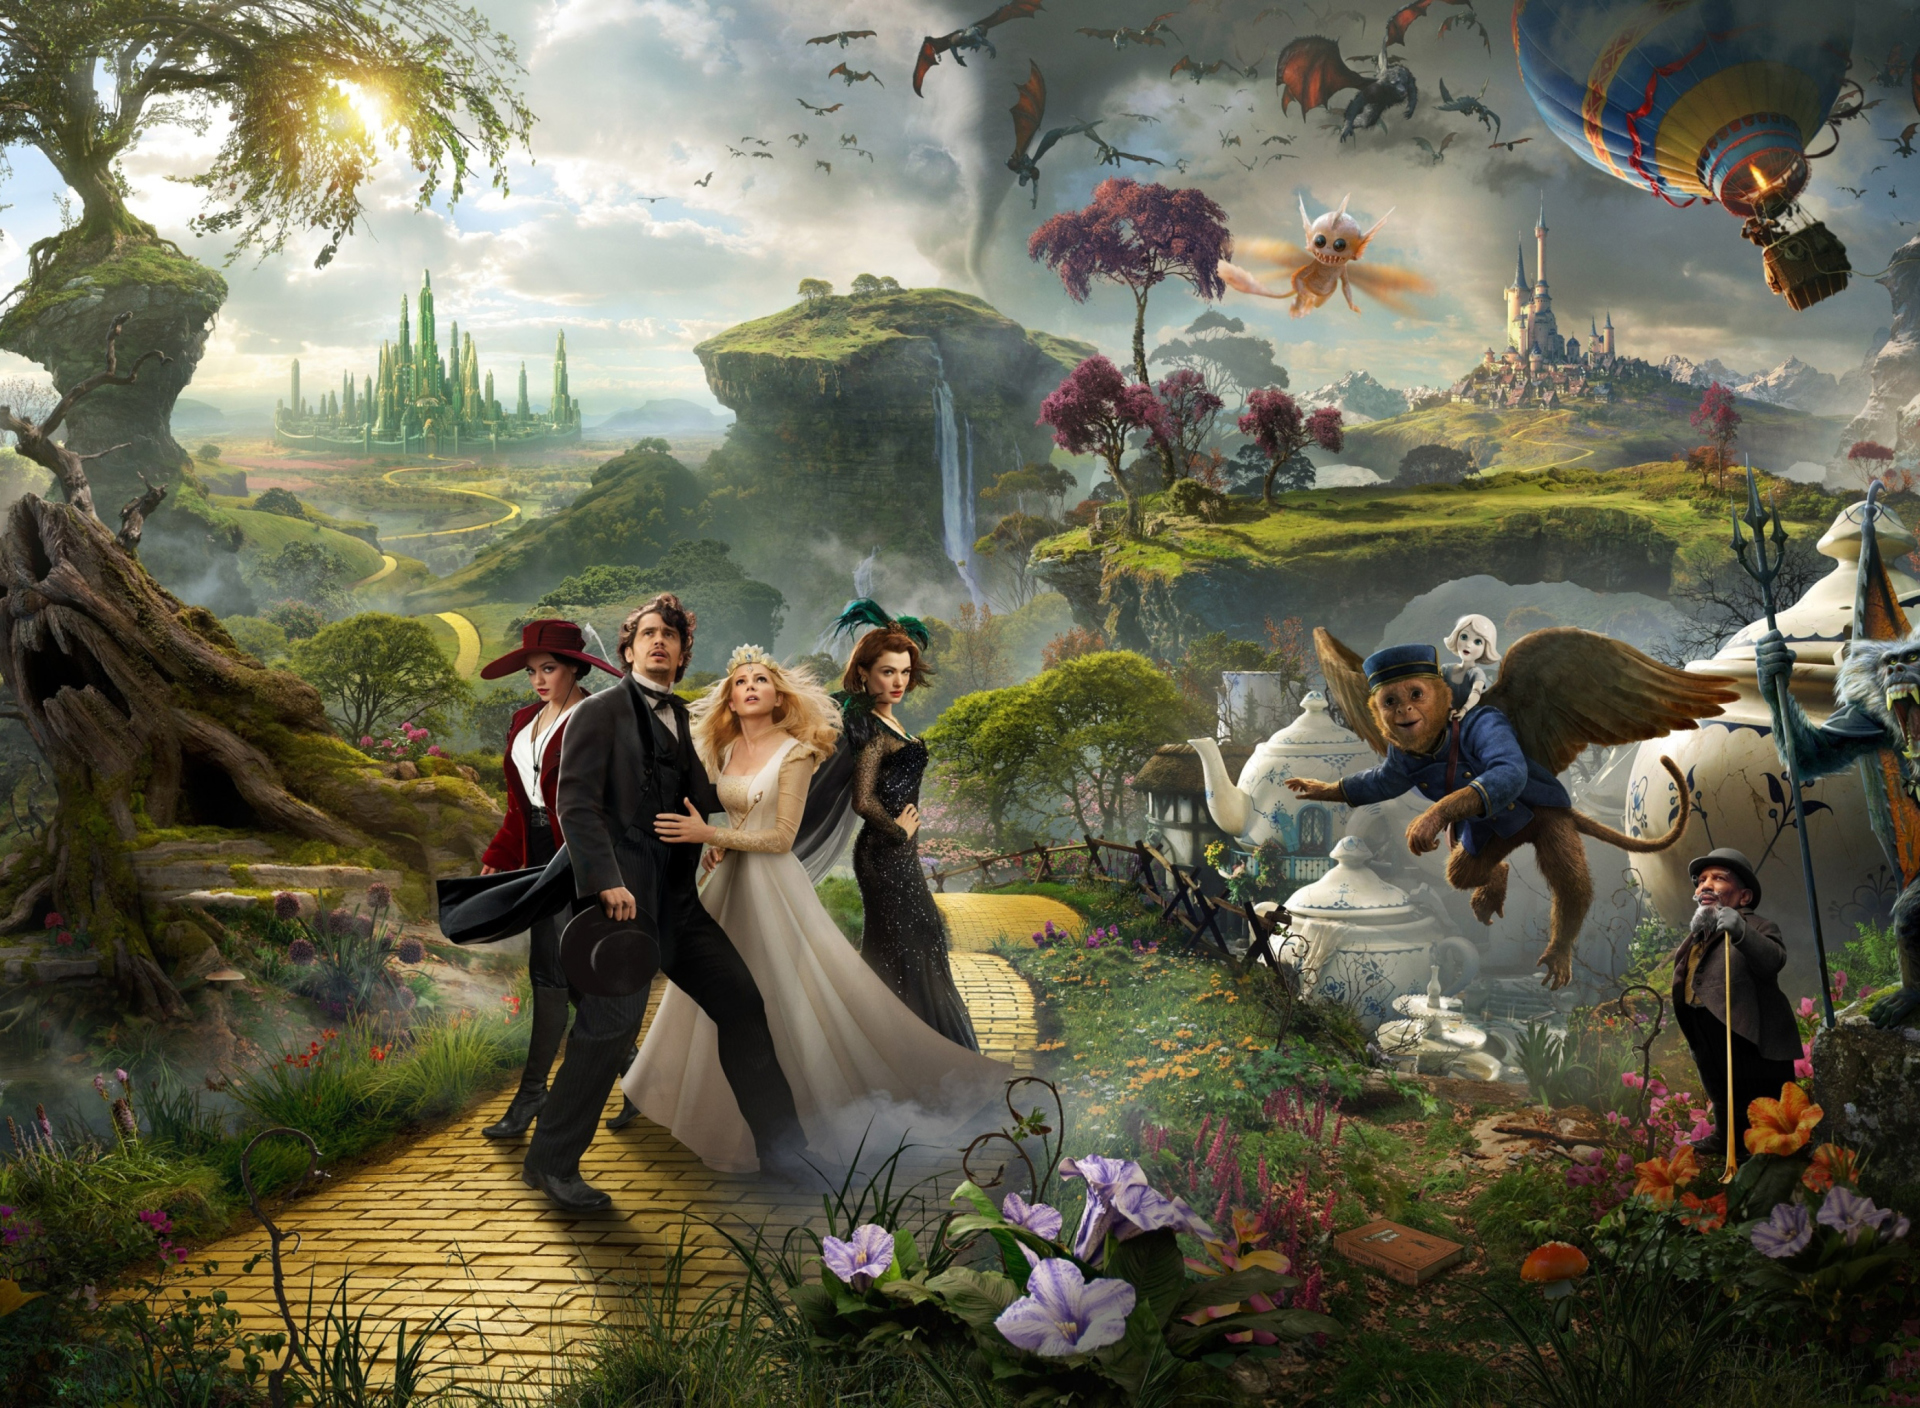 Oz The Great And Powerful 2013 Movie screenshot #1 1920x1408